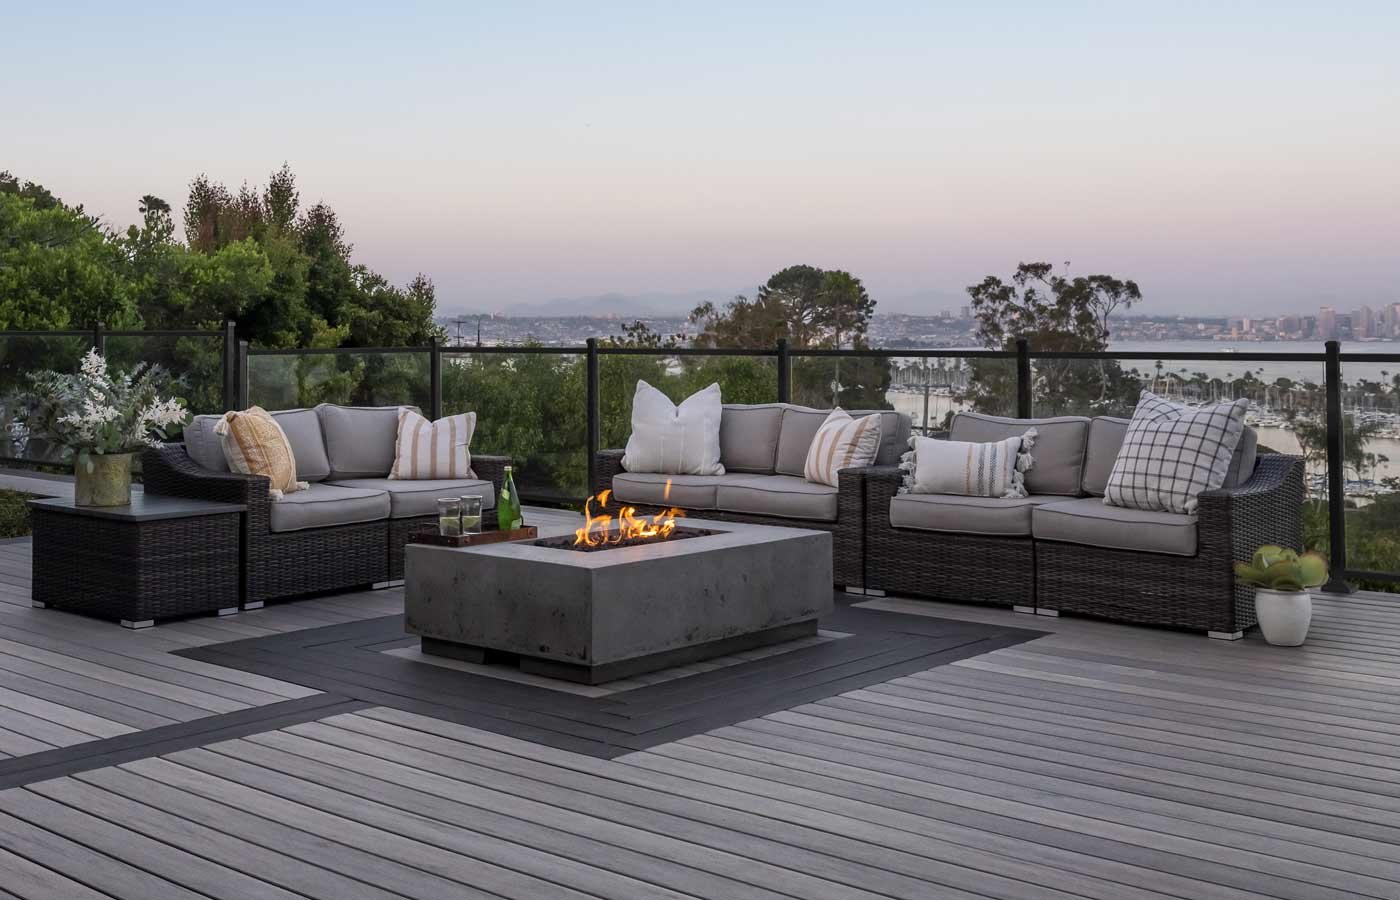 A patio with a deck, sectional chairs and a fire pit